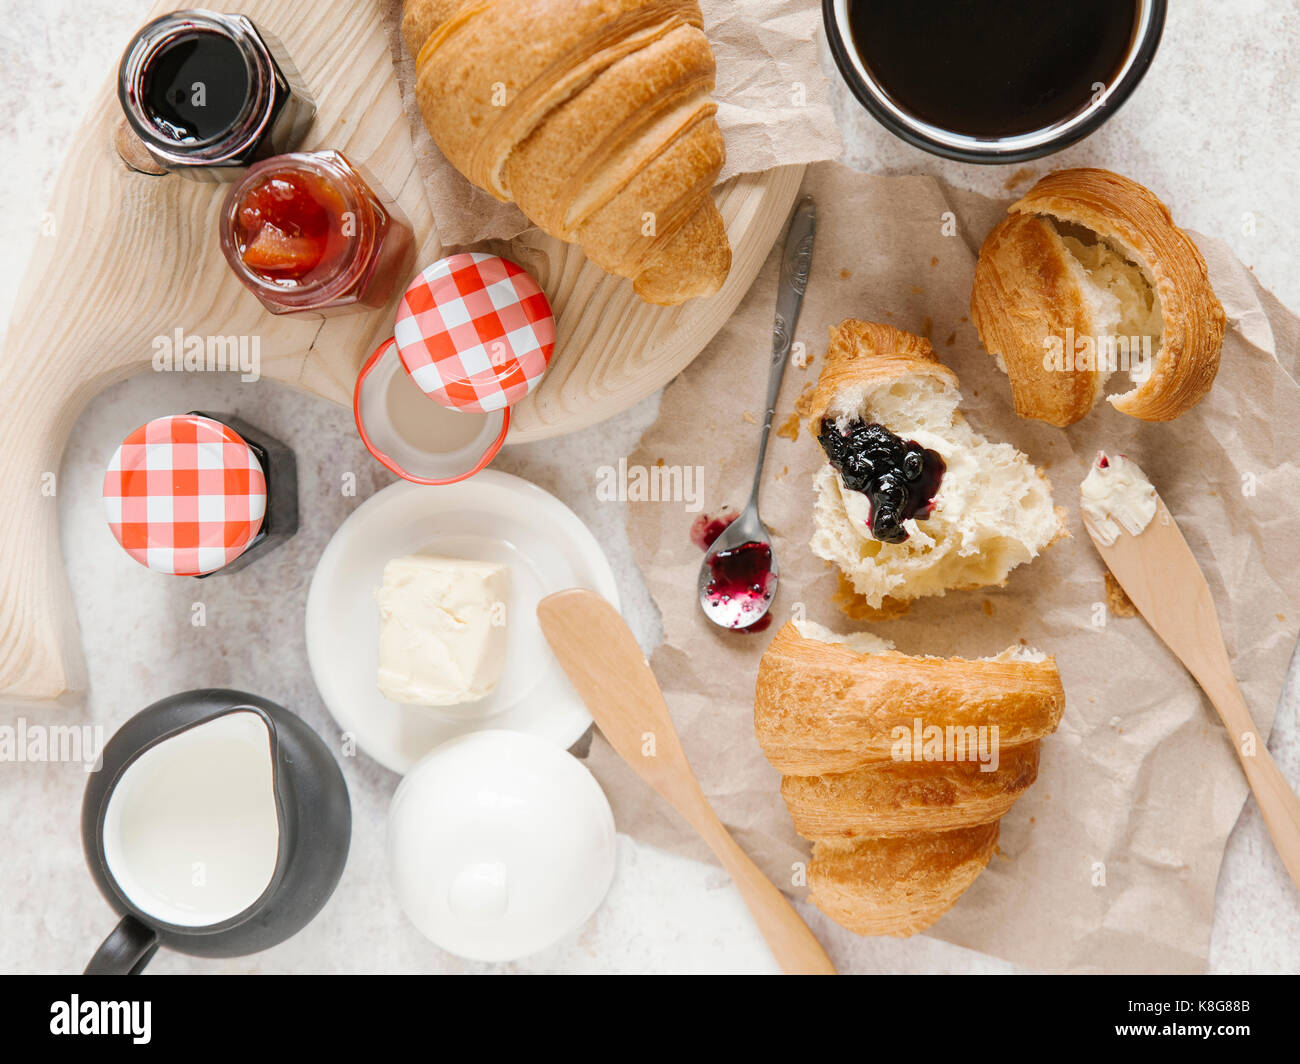 Overhead view of breakfast on table Stock Photo